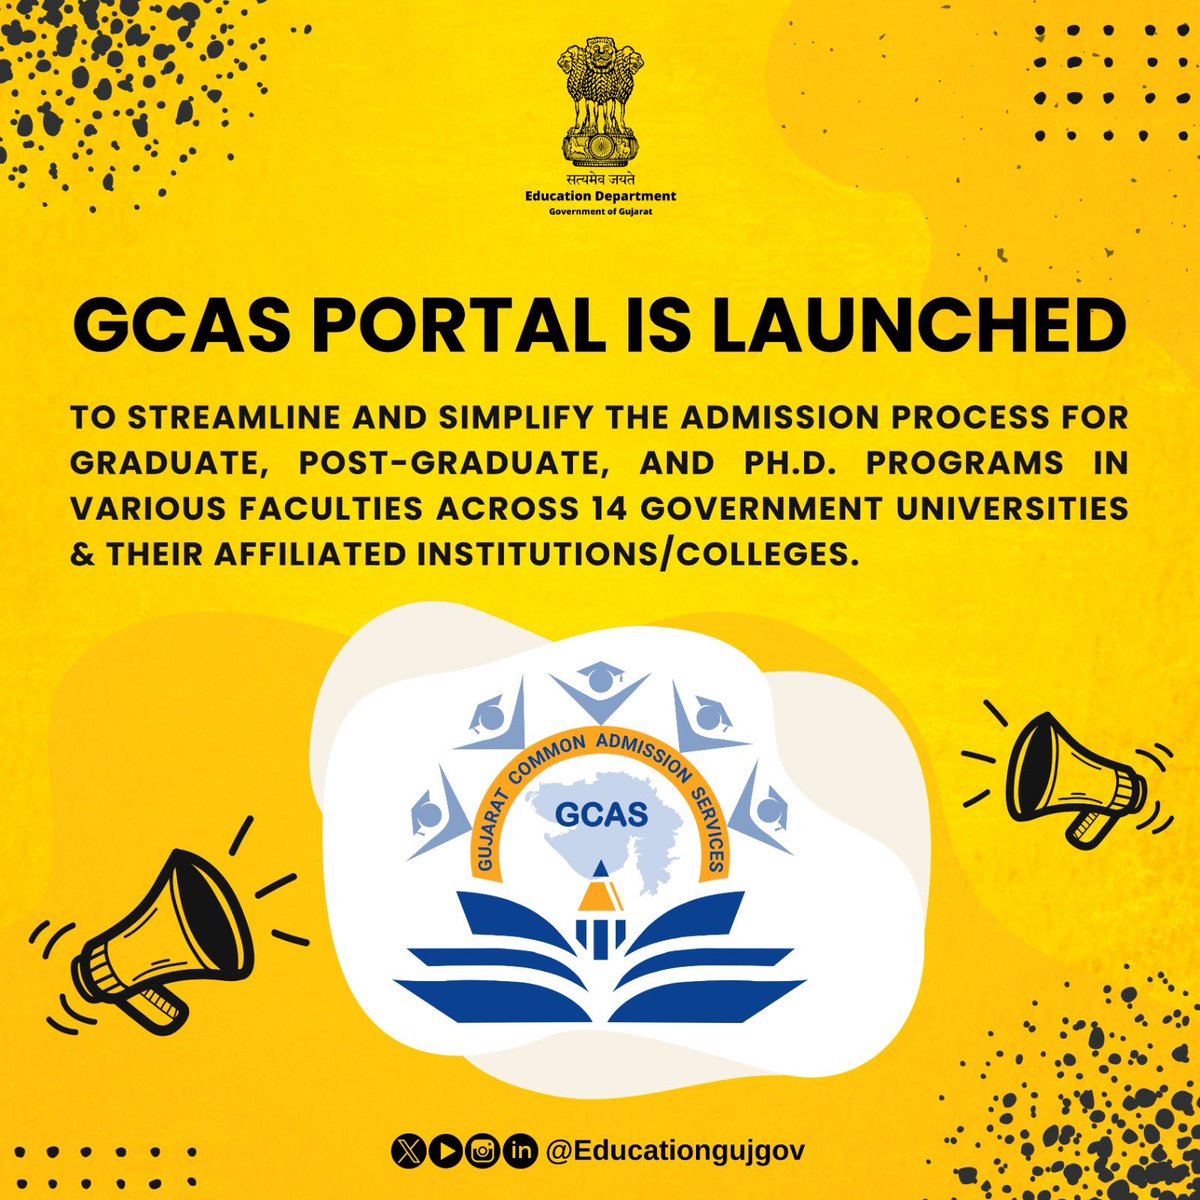 One-Stop Admissions for Gujarat! The Gujarat Common Admission Services Portal (GCAS) is here to simplify your application process for UG, PG & Ph.D. programs across Government Universities and affiliated colleges in Gujarat. For More Information Visit: gcas.gujgov.edu.in